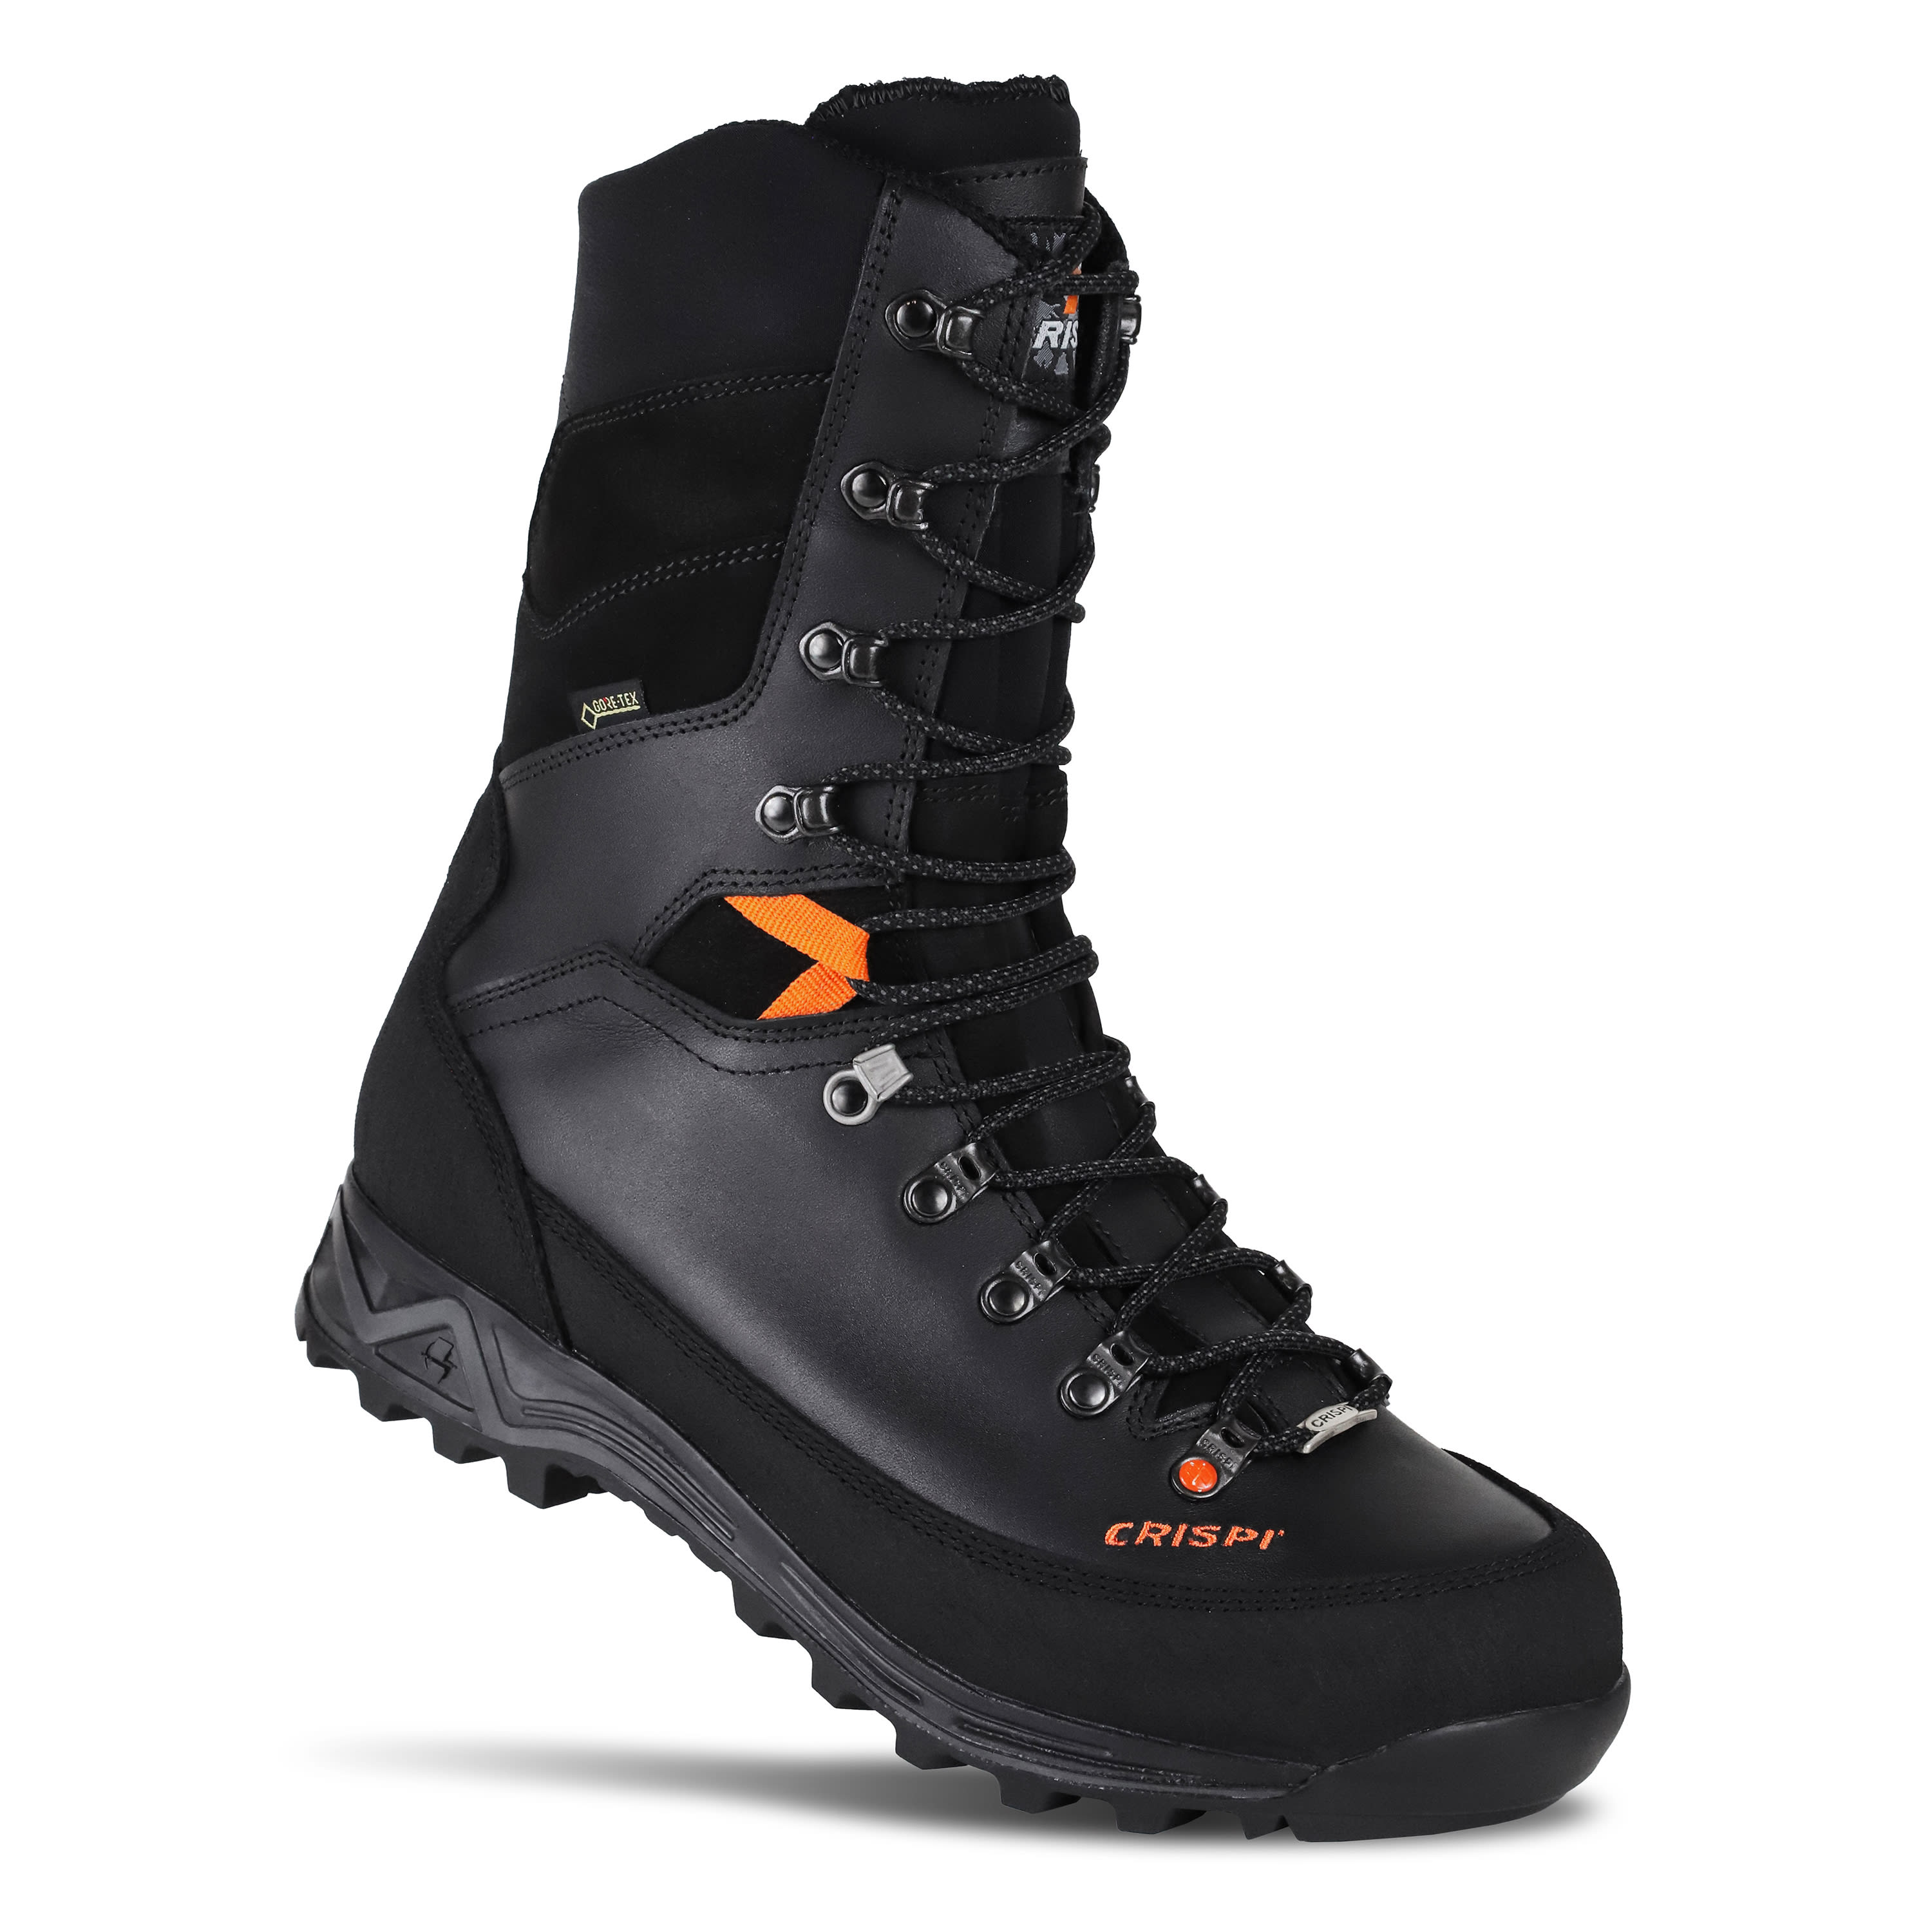 Buy Crispi Ranger Gore-Tex from Outnorth